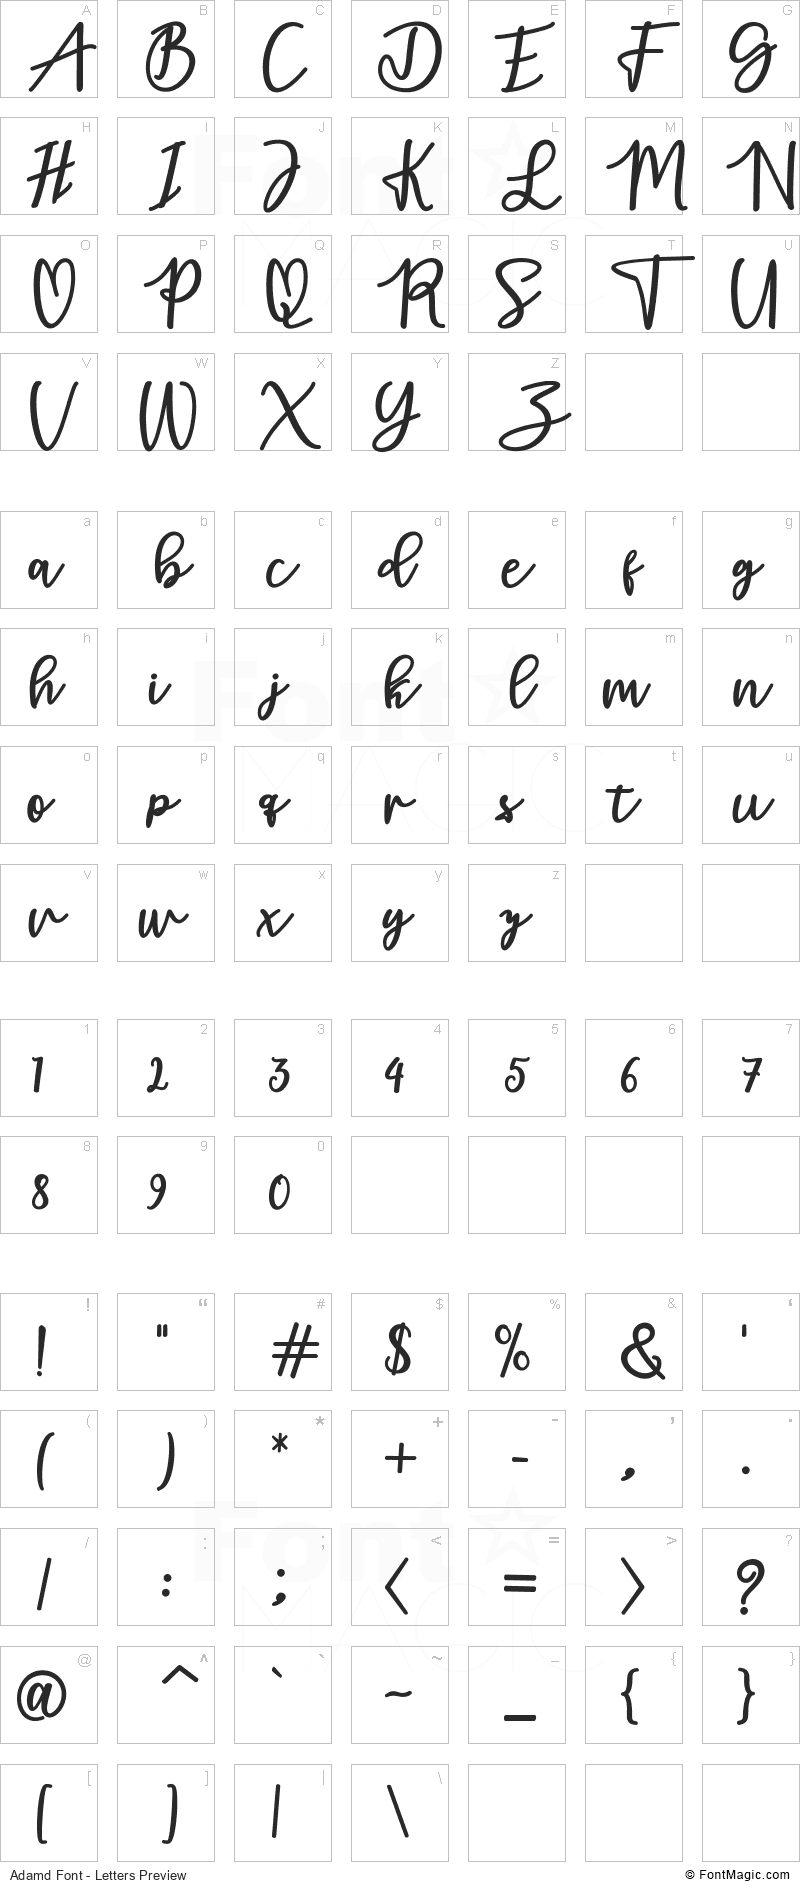 Adamd Font - All Latters Preview Chart